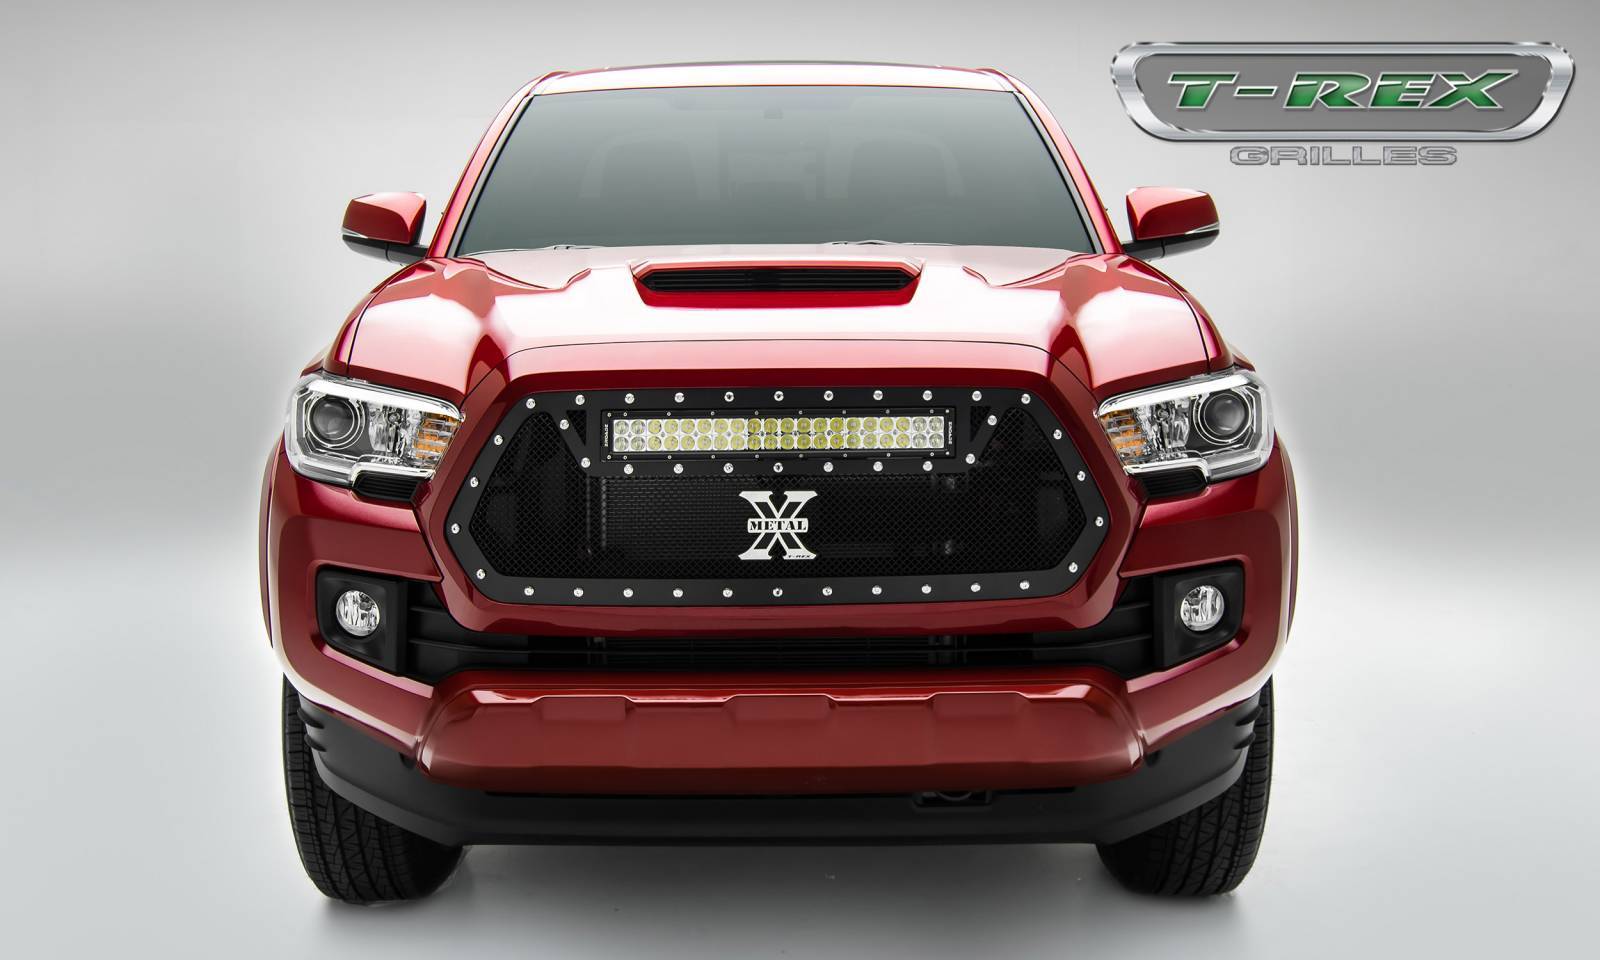 2016 2017 Tacoma Torch Grille Black 1 Pc Insert Chrome Studs